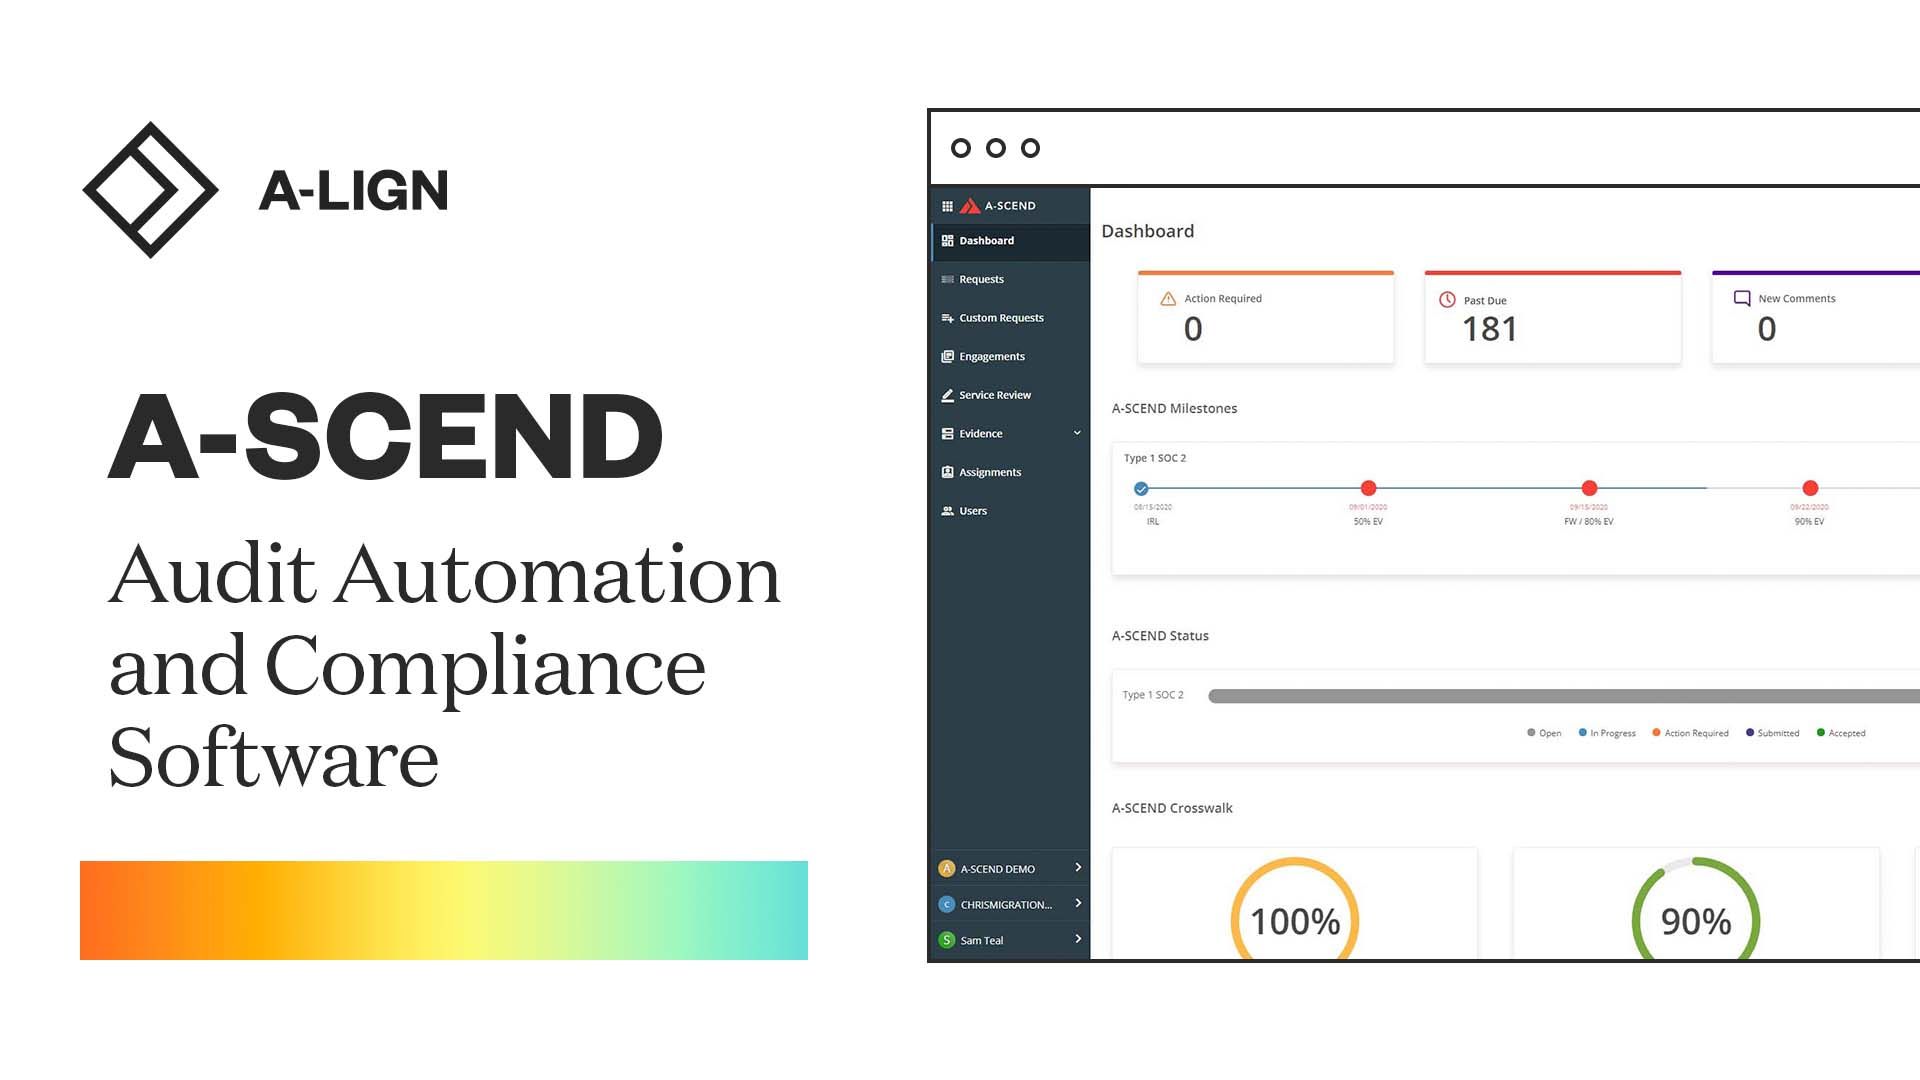 A-LIGN developed technology to drive audits with their own compliance management software, A-SCEND.